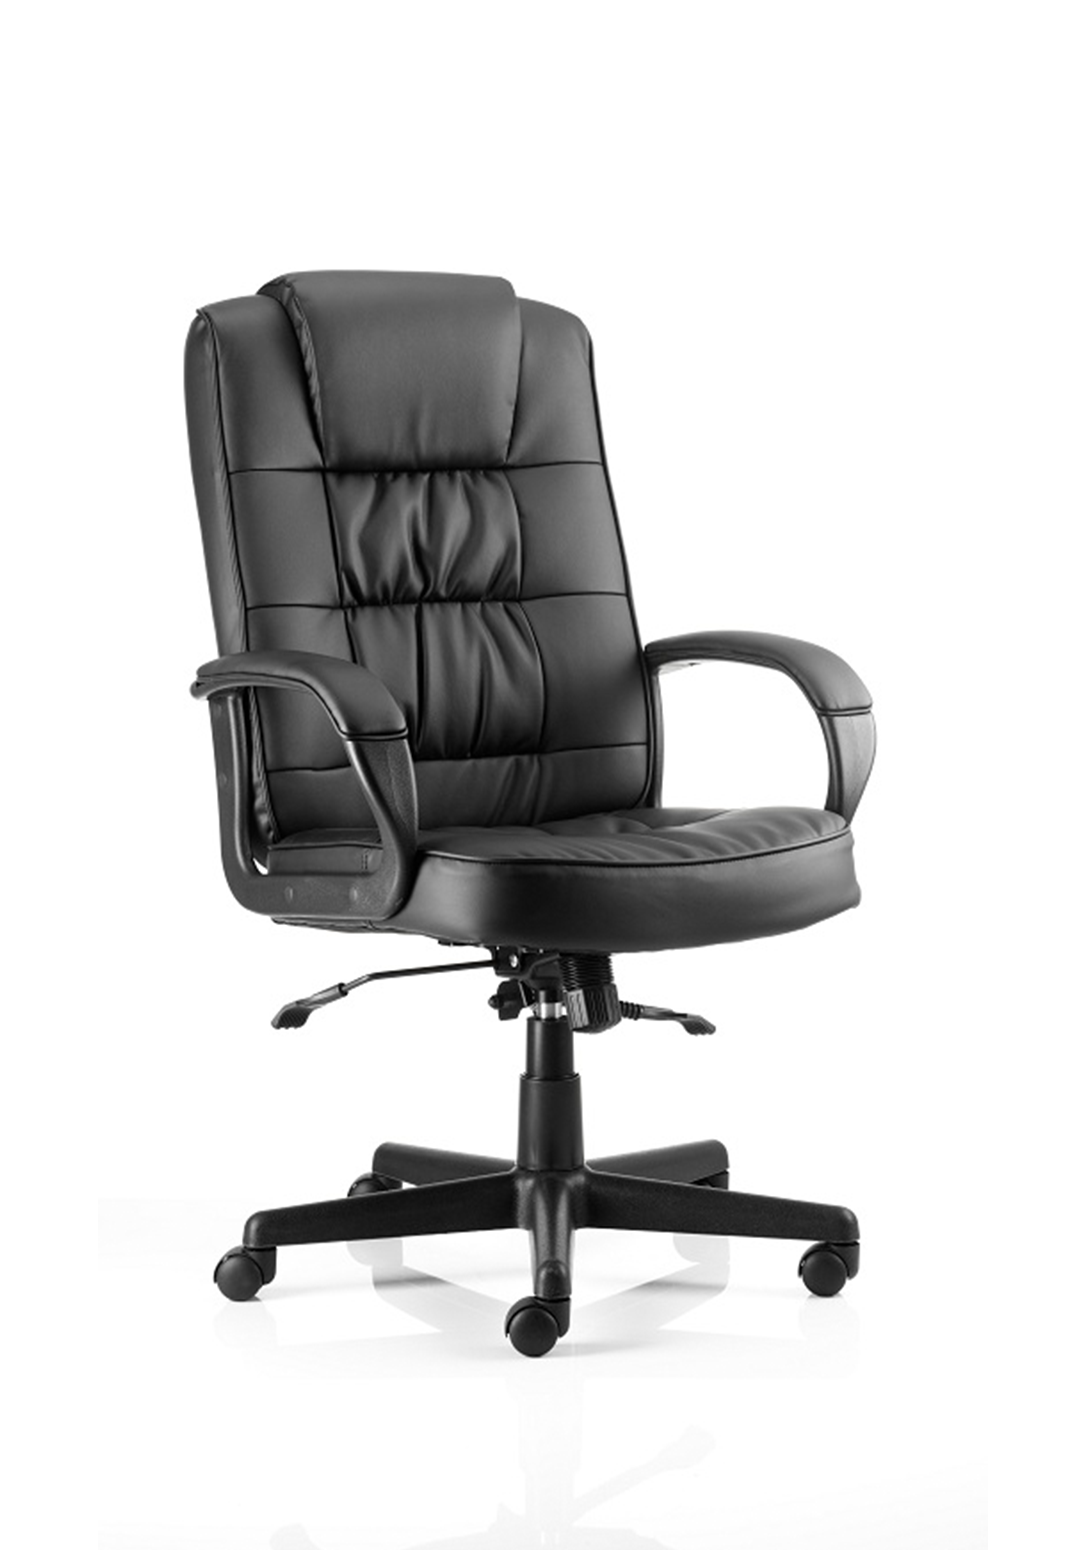 Moore Executive Chair Black Fabric With Arms Image 2